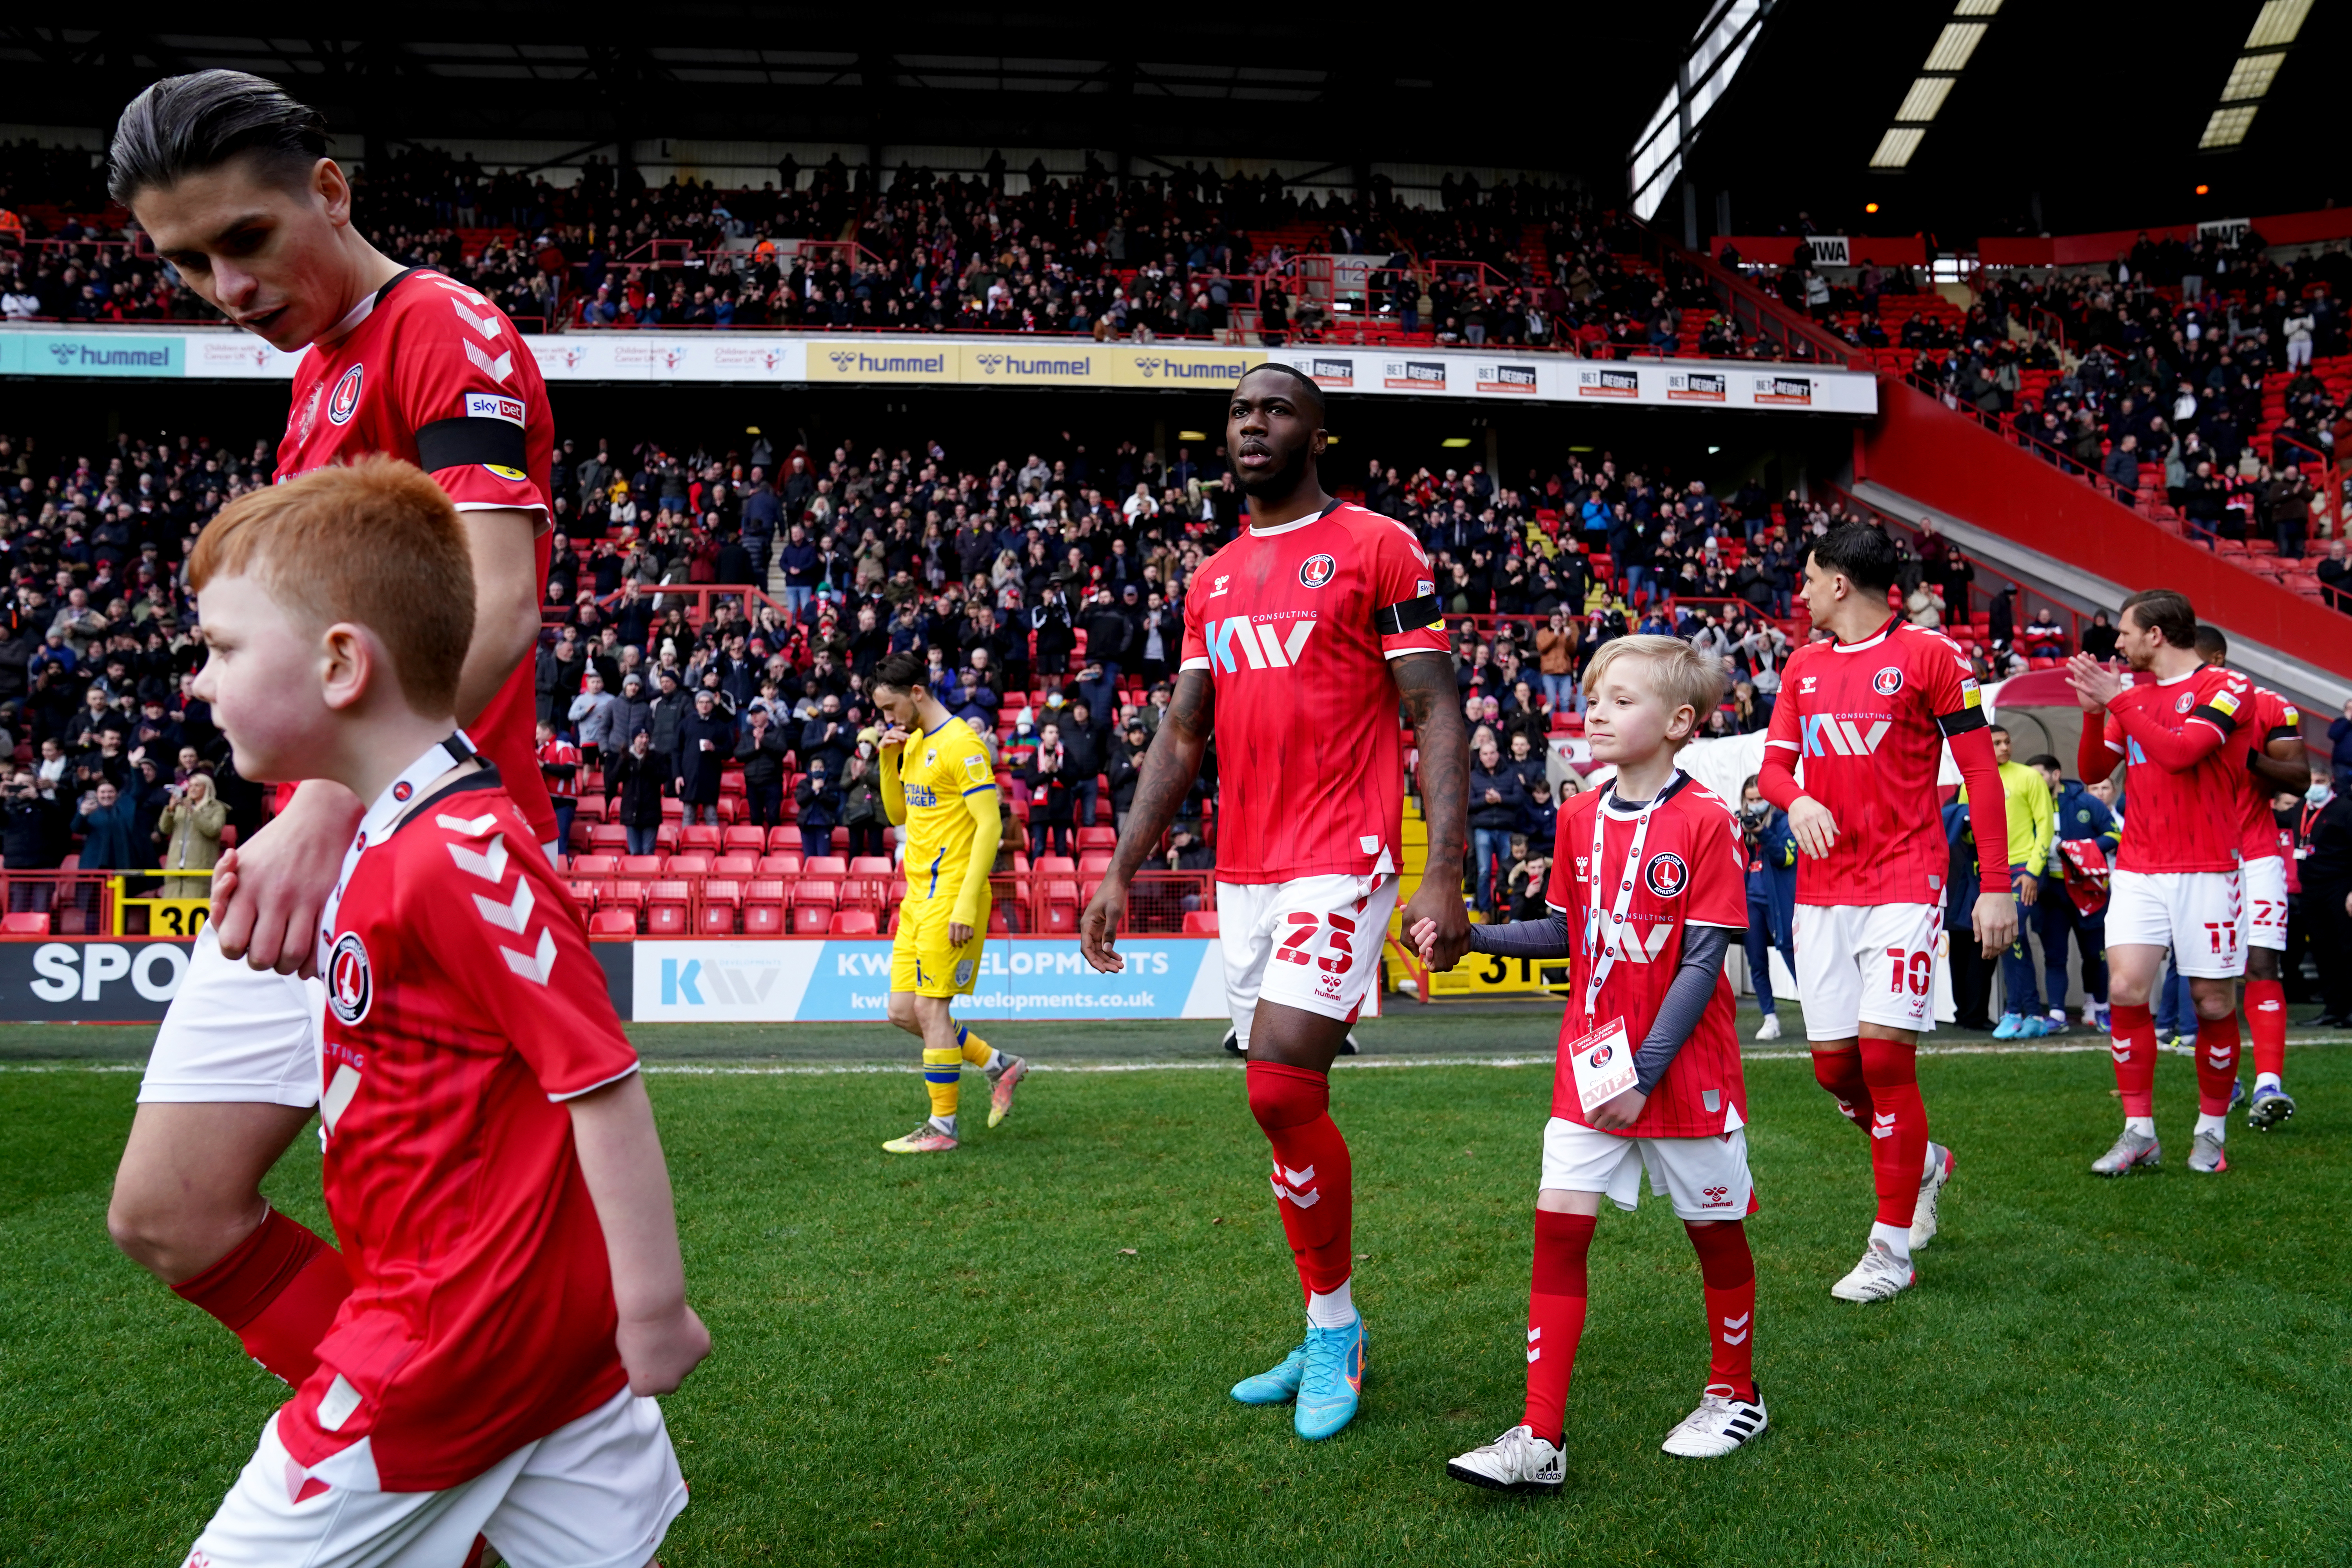 George Dobson walks out with a mascot at The Valley